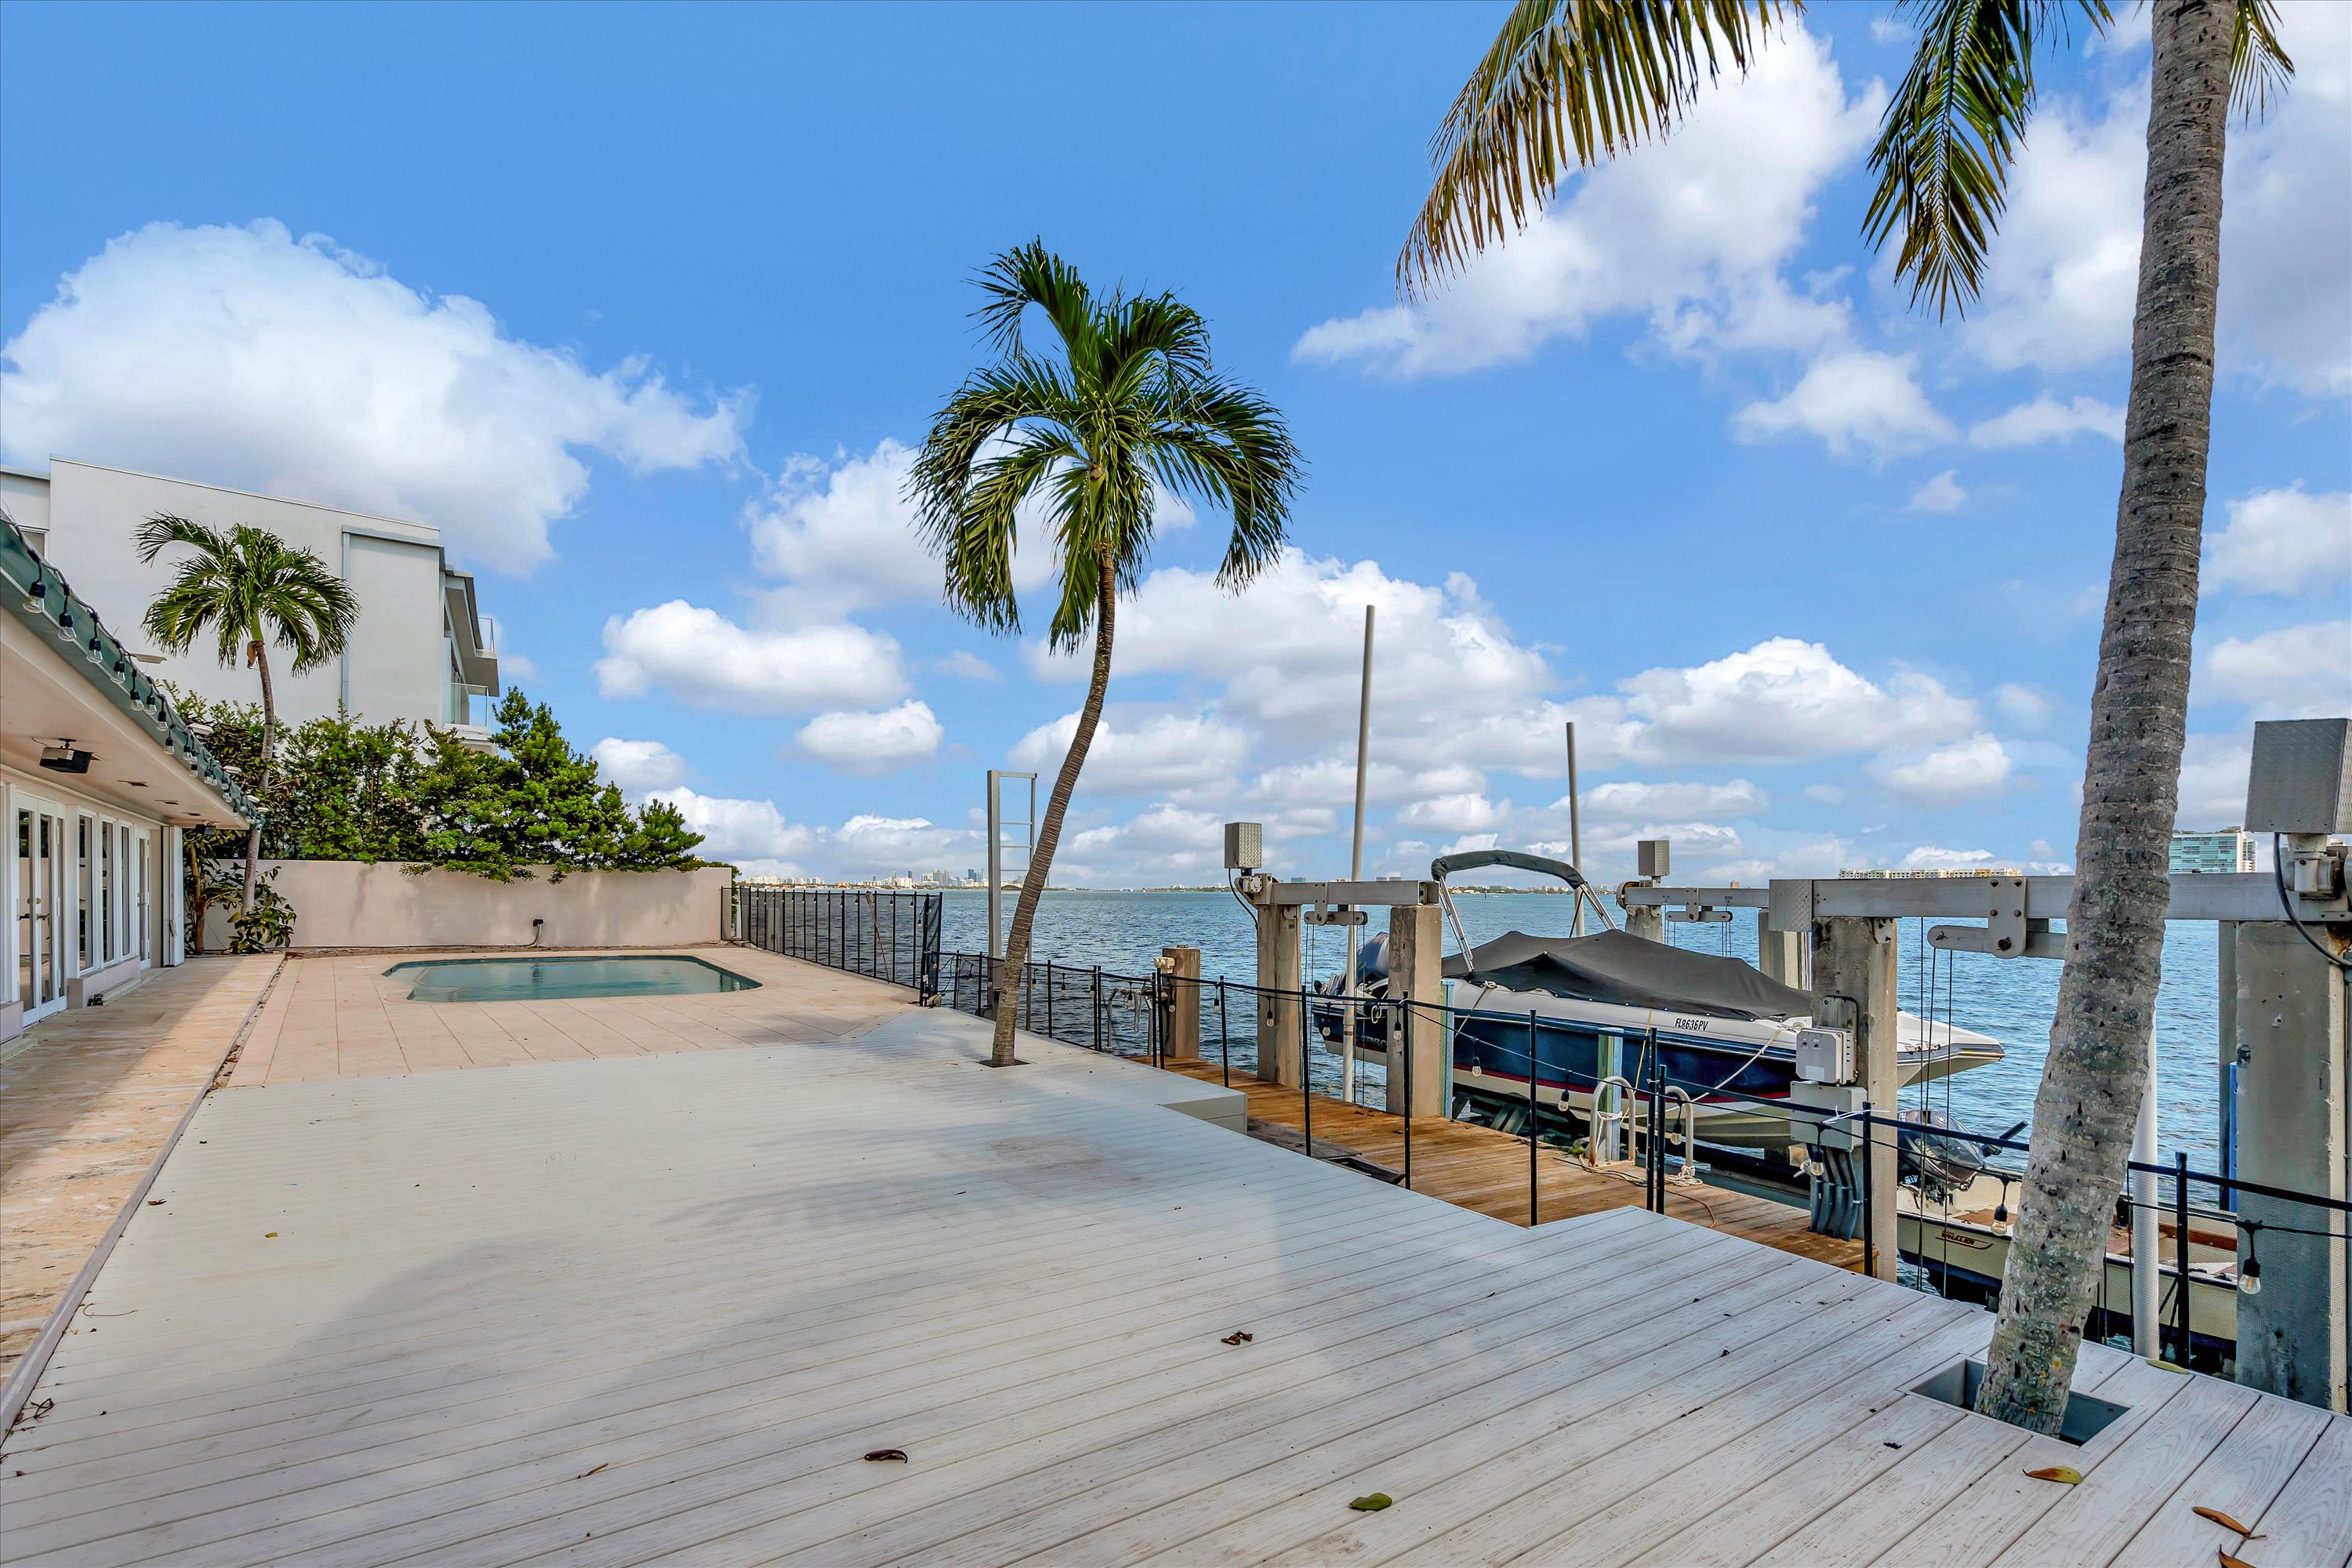 Beautiful Watson Island, Miami, FL house showcasing the best property management services